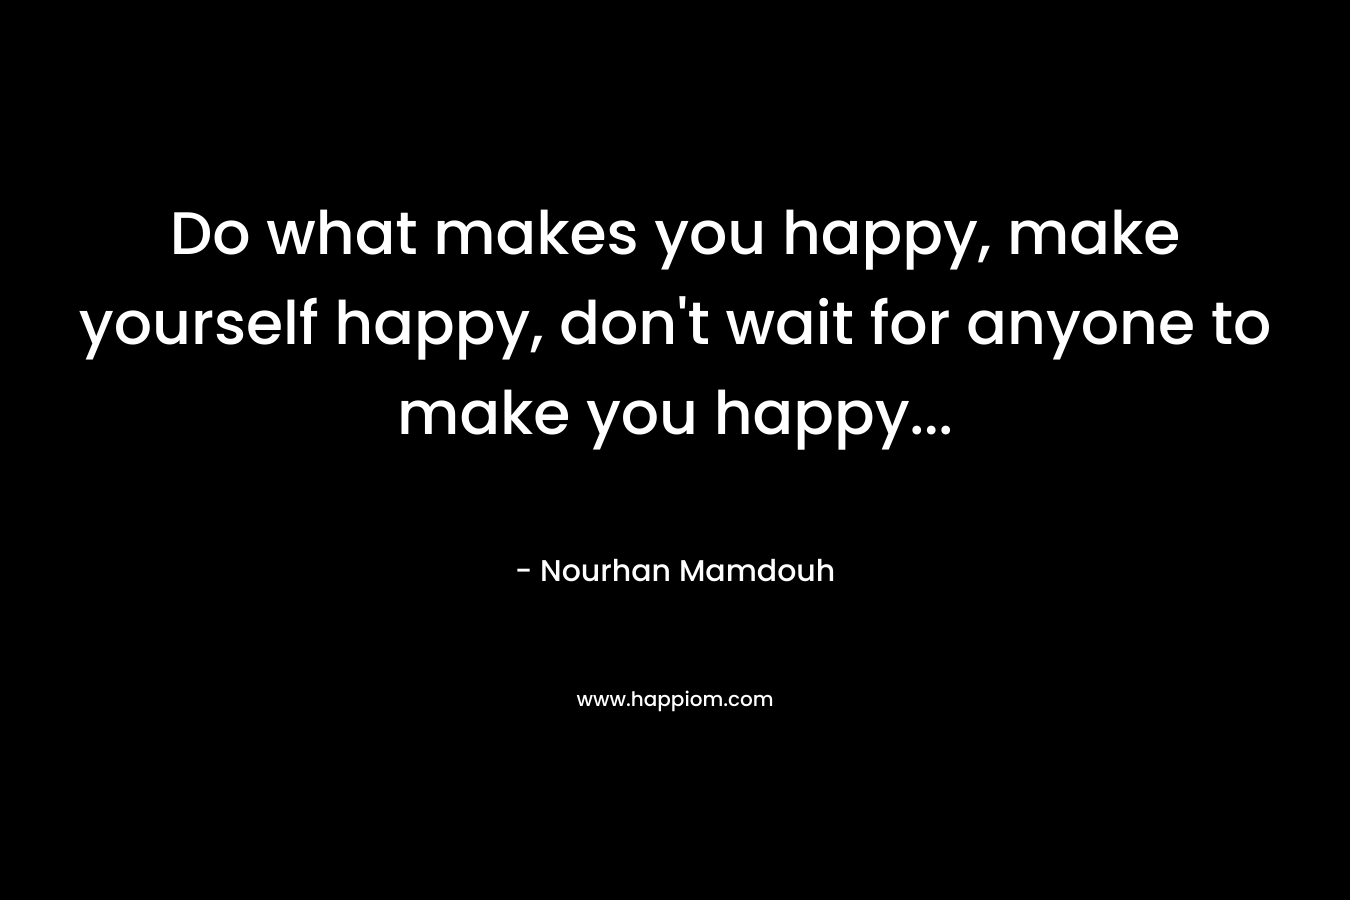 Do what makes you happy, make yourself happy, don't wait for anyone to make you happy...